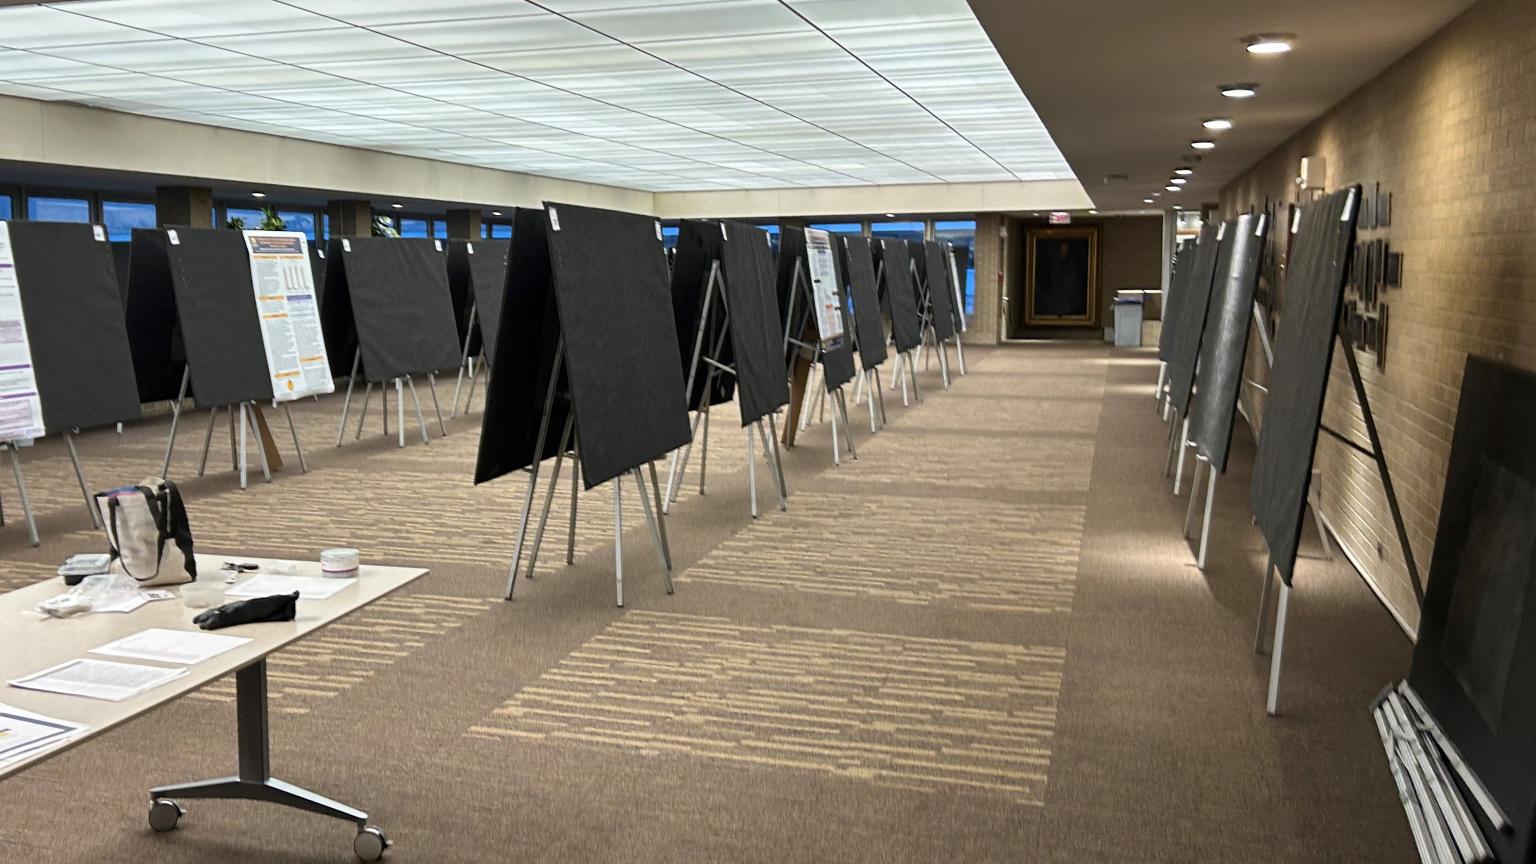 Image of pediatric research posters in a large room.